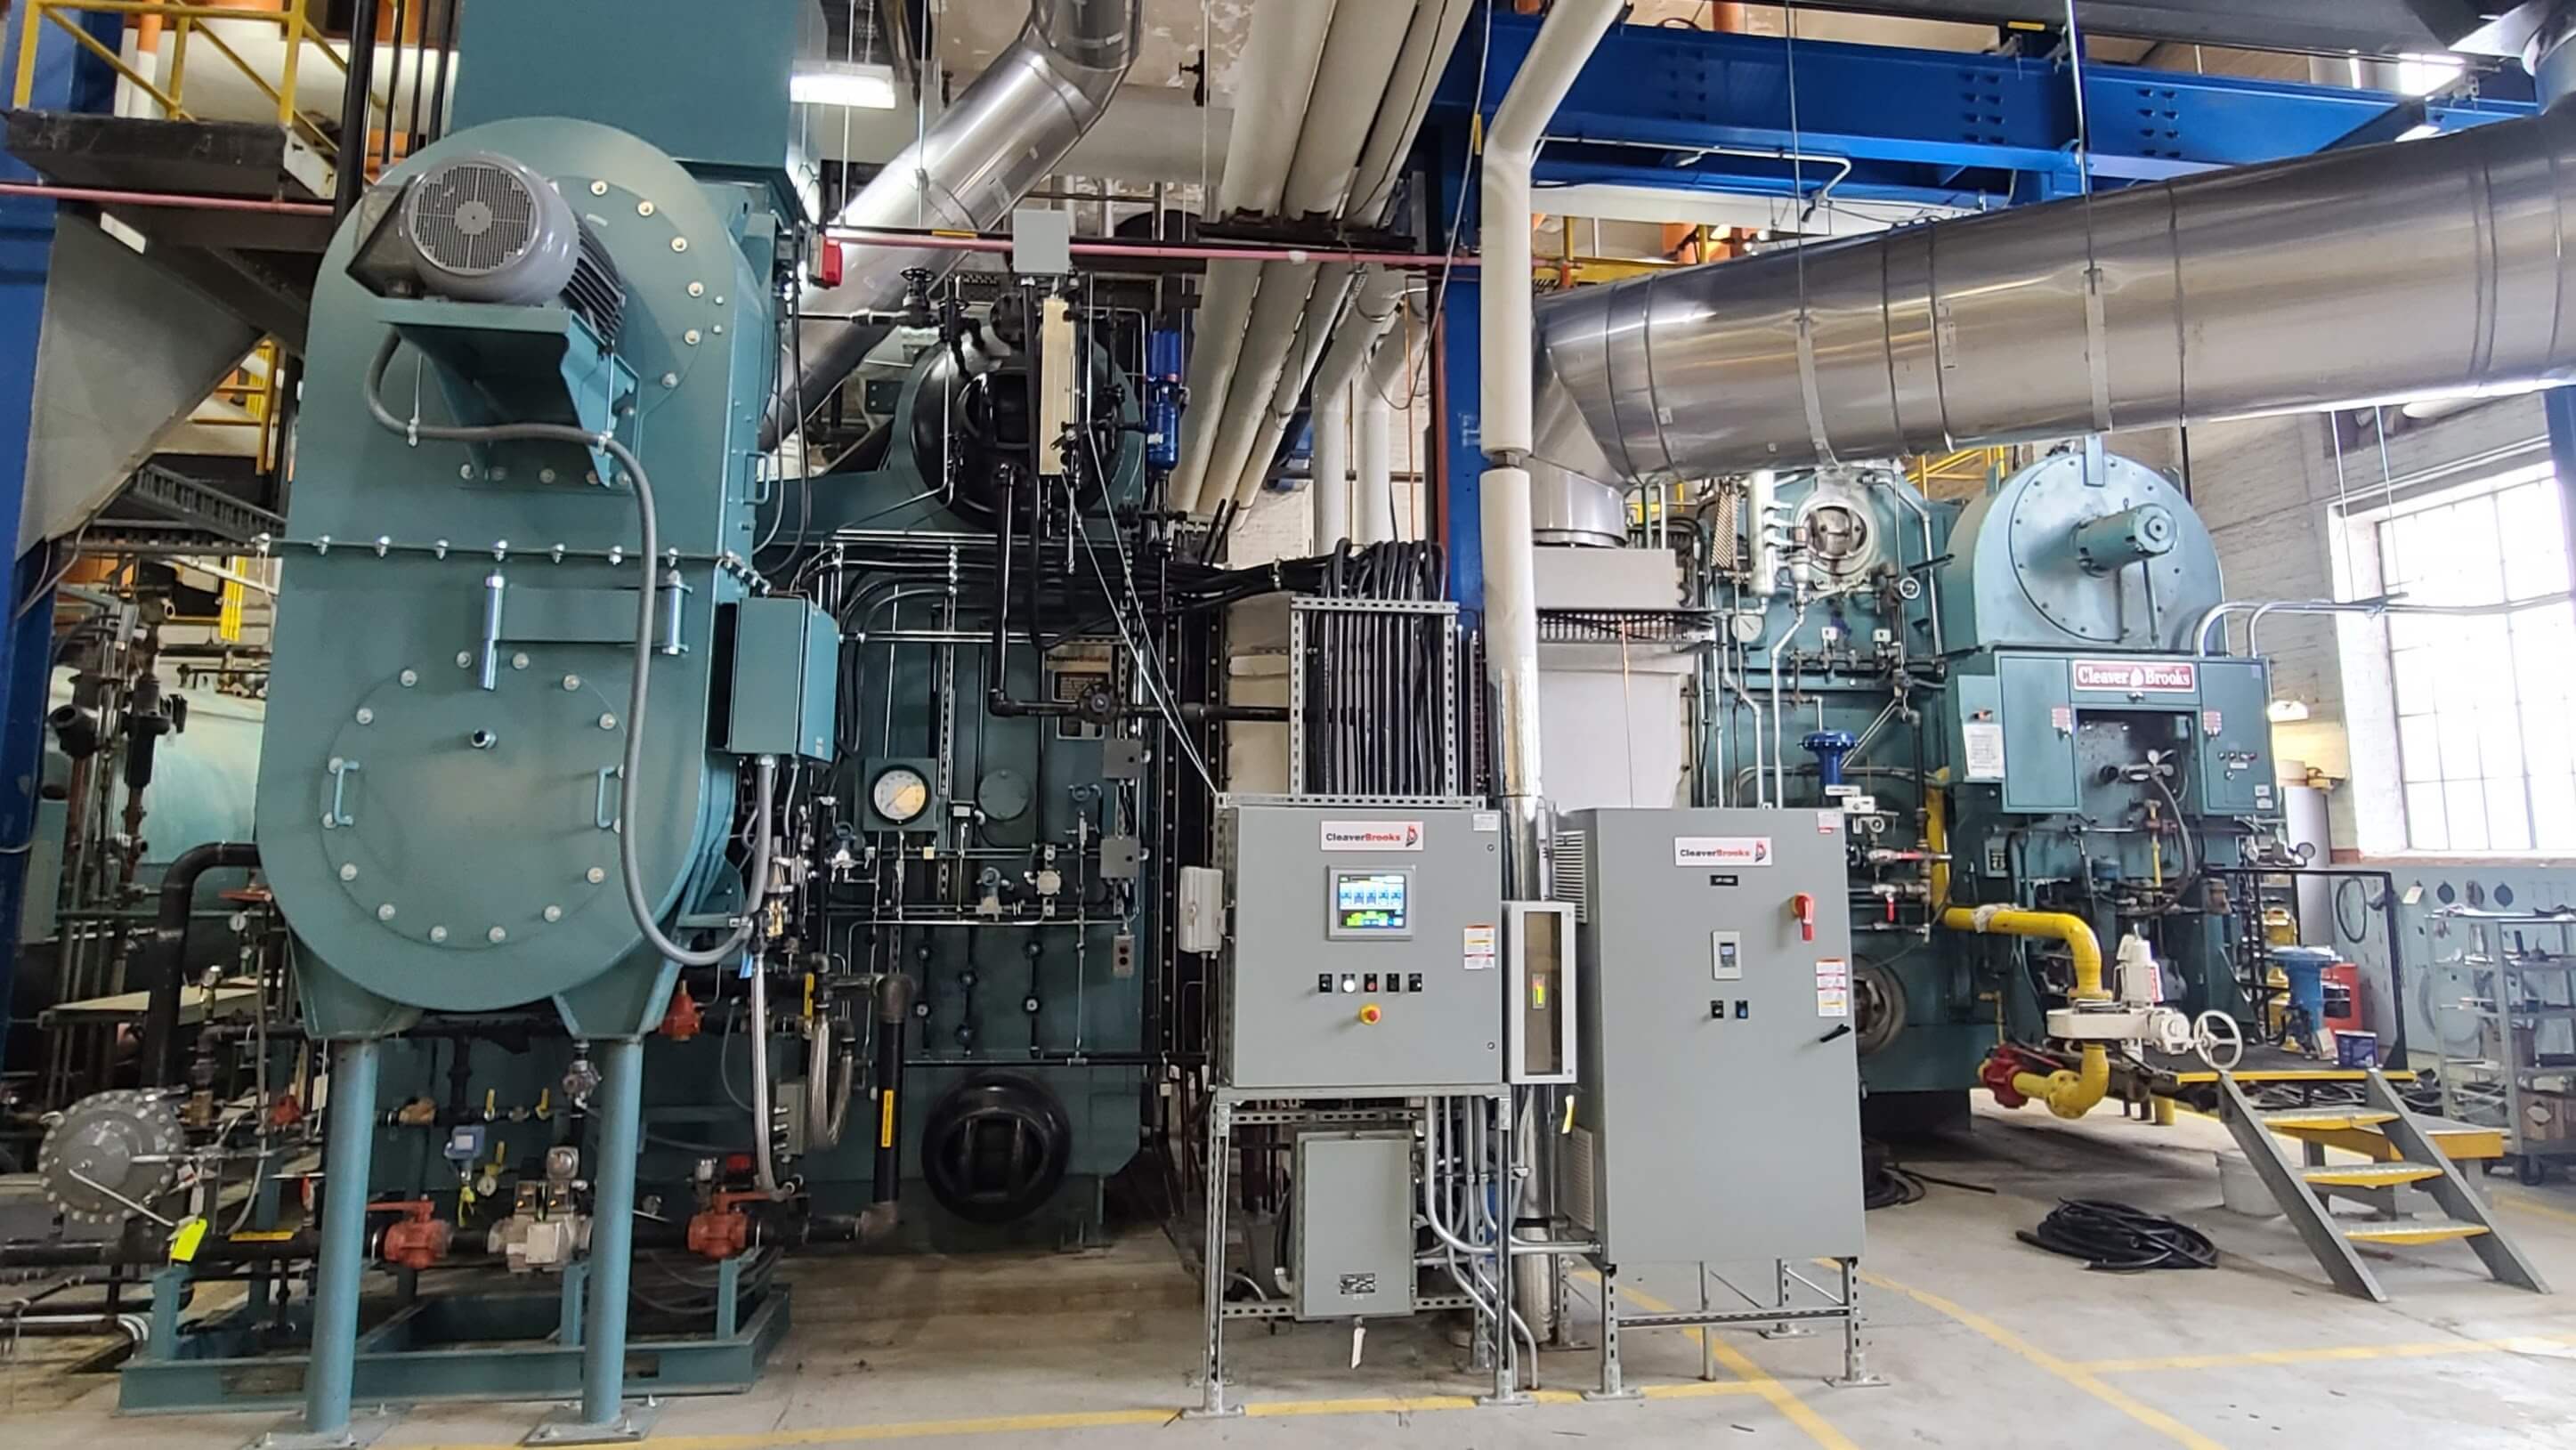 JBS Beef Plant with a Boiler Room Conversion